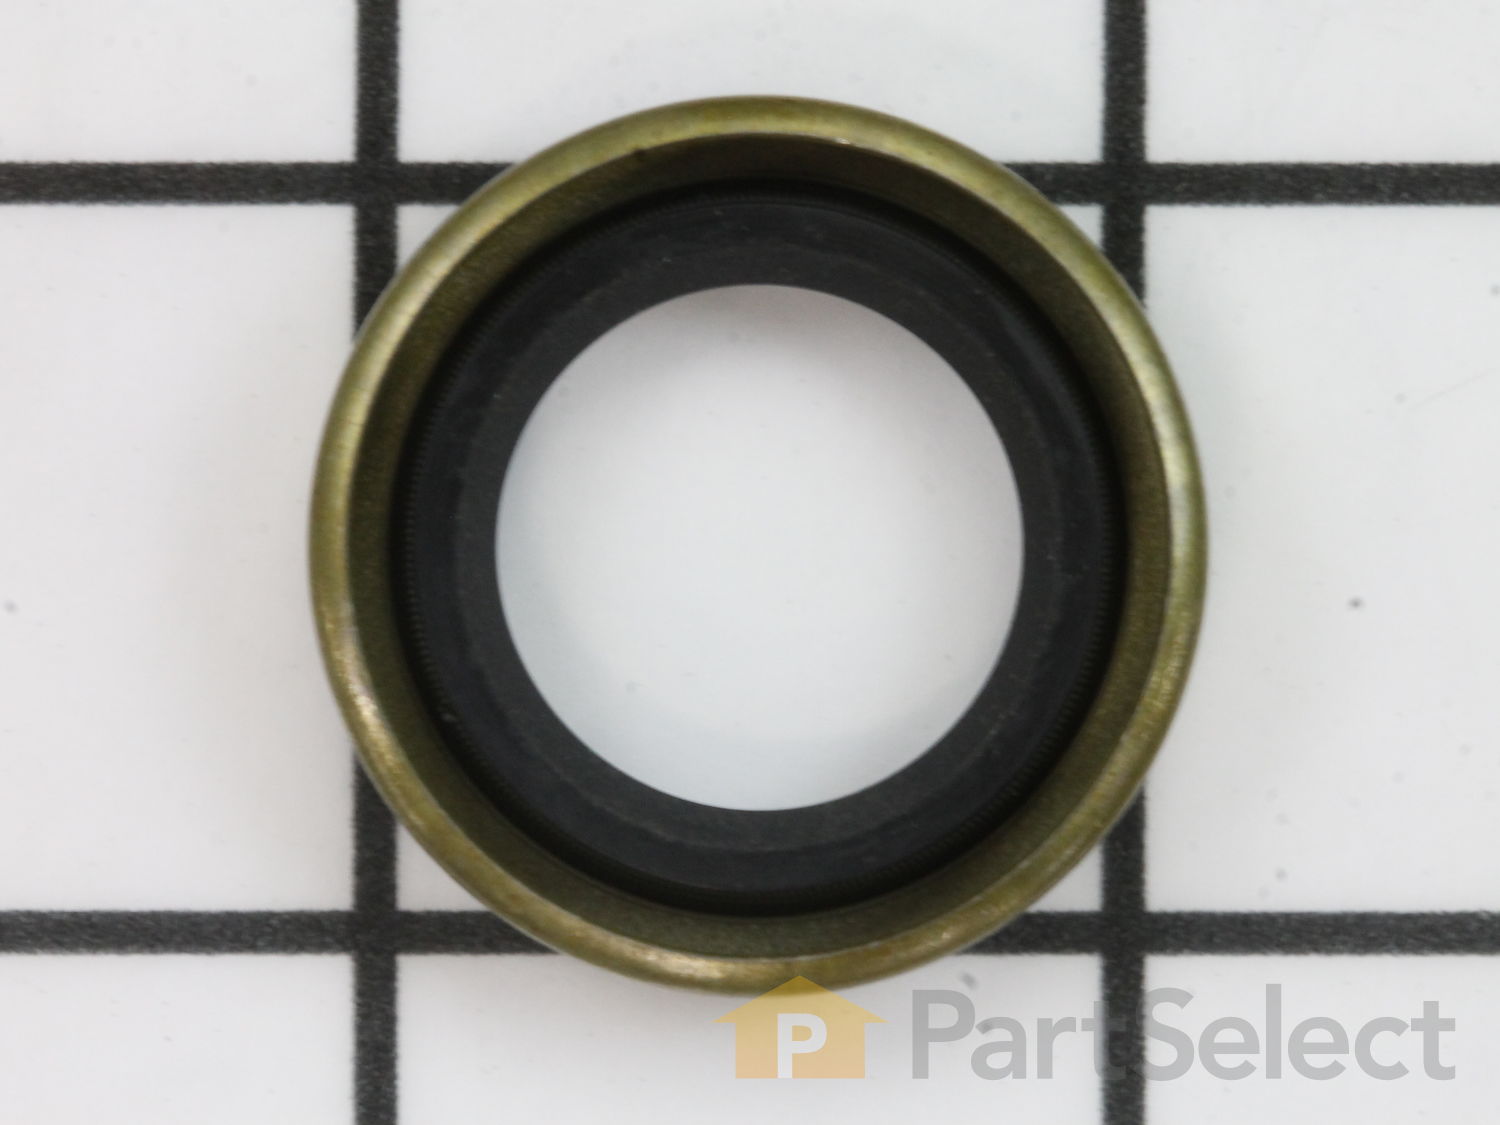 Gearbox Seal 9566MA | Official Craftsman Part | Fast Shipping | PartSelect